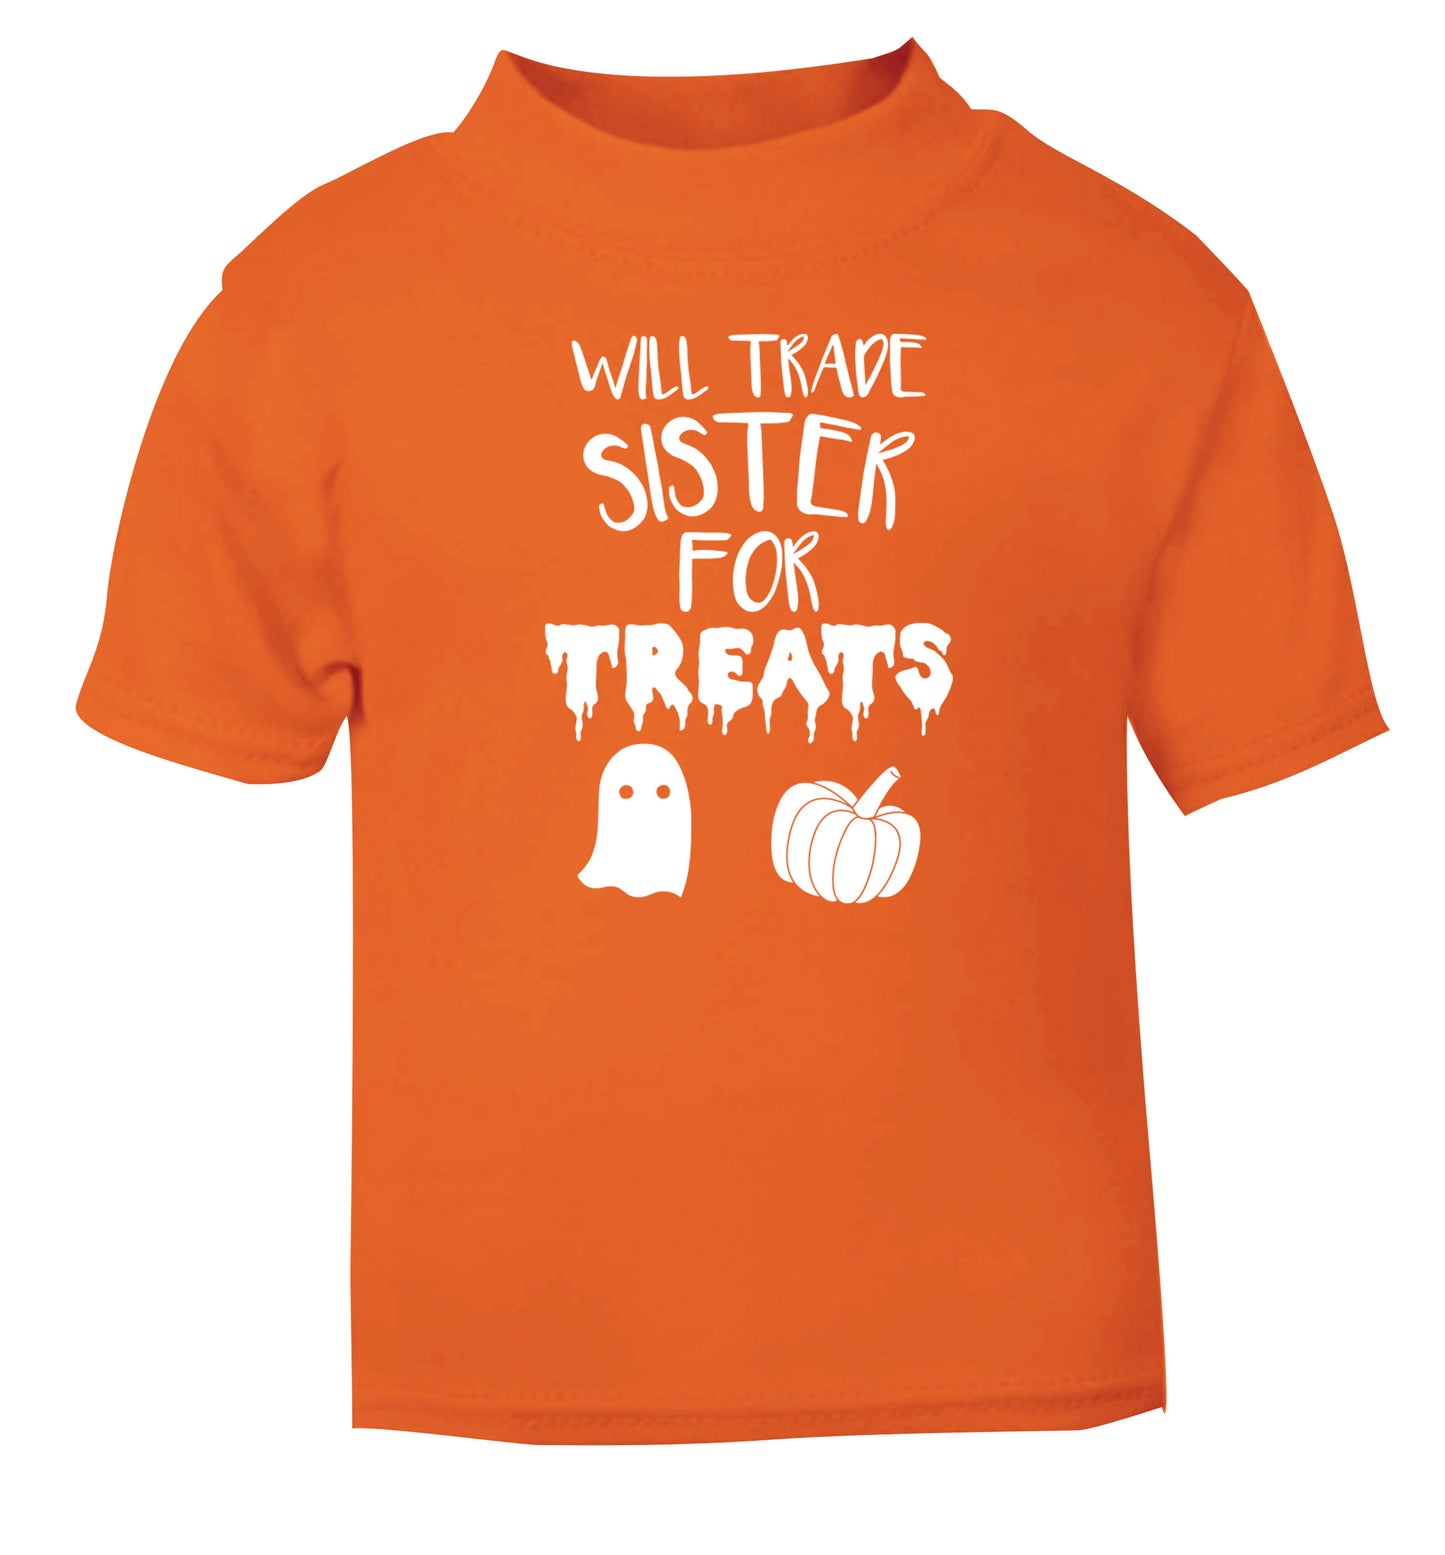 Will trade sister for treats orange Baby Toddler Tshirt 2 Years